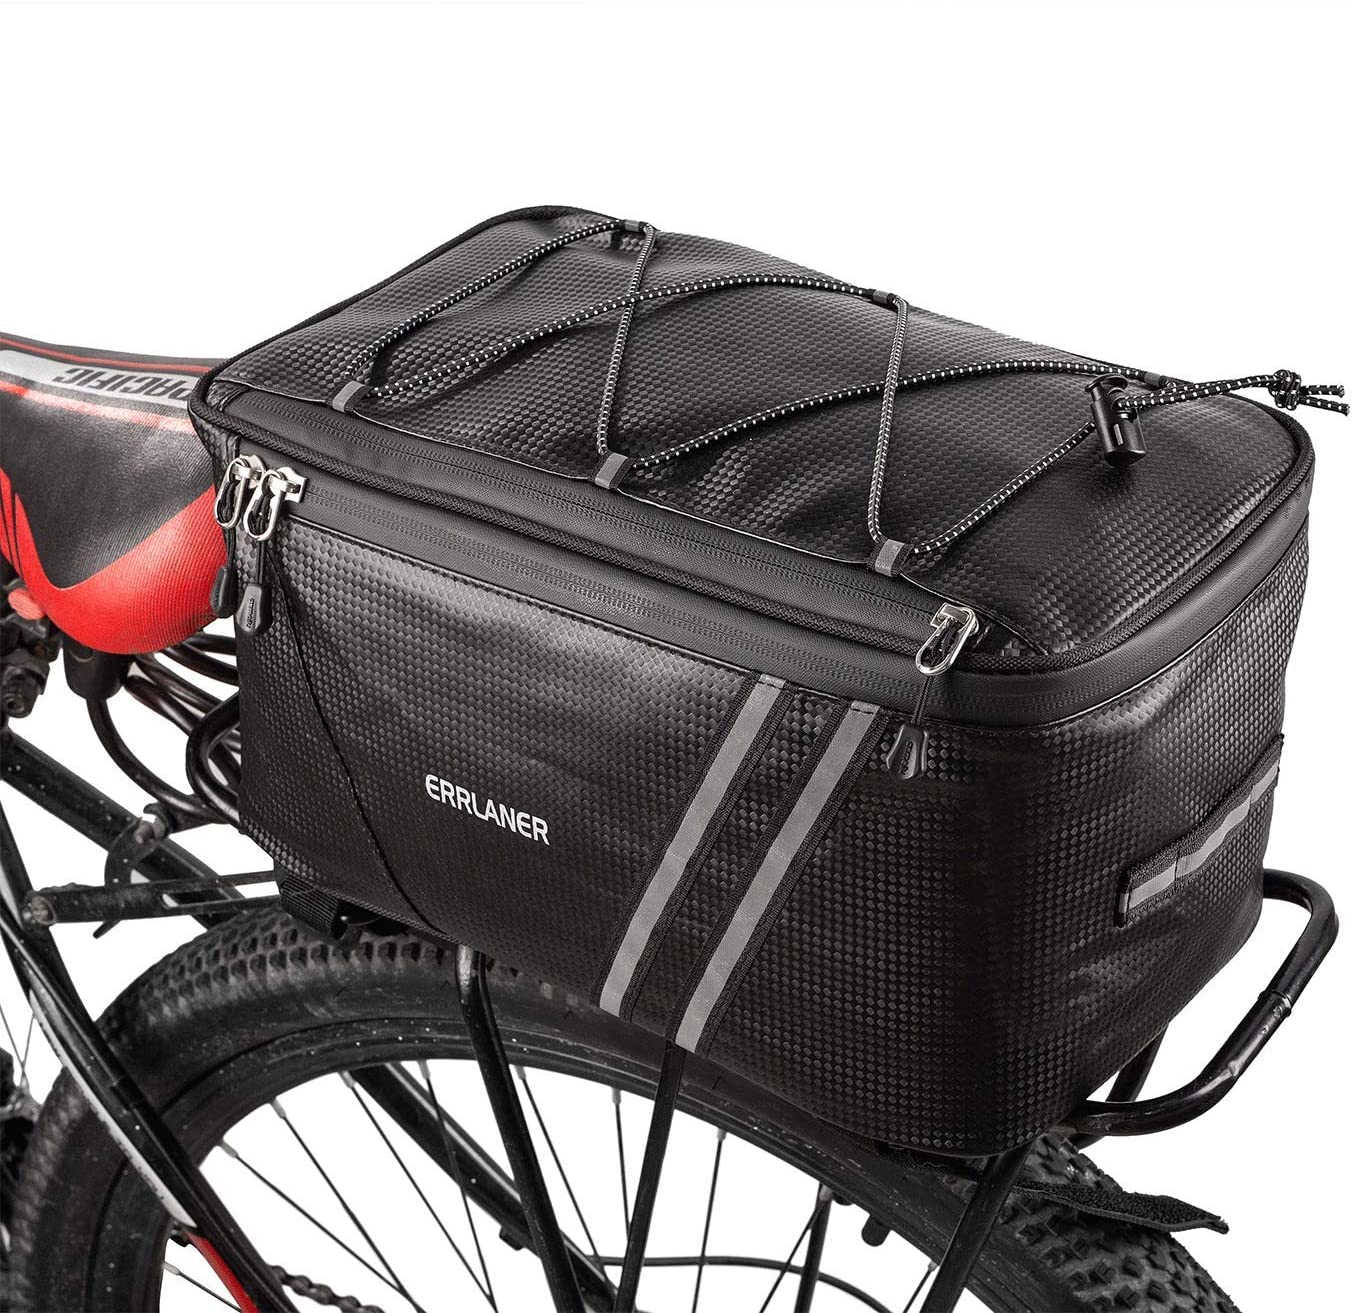 Large Capacity Bike Rear Panniers with Reflective Trim Chenxianyi Bike Bag Bicycle Panniers Rack Trunks with Adjustable Hooks 